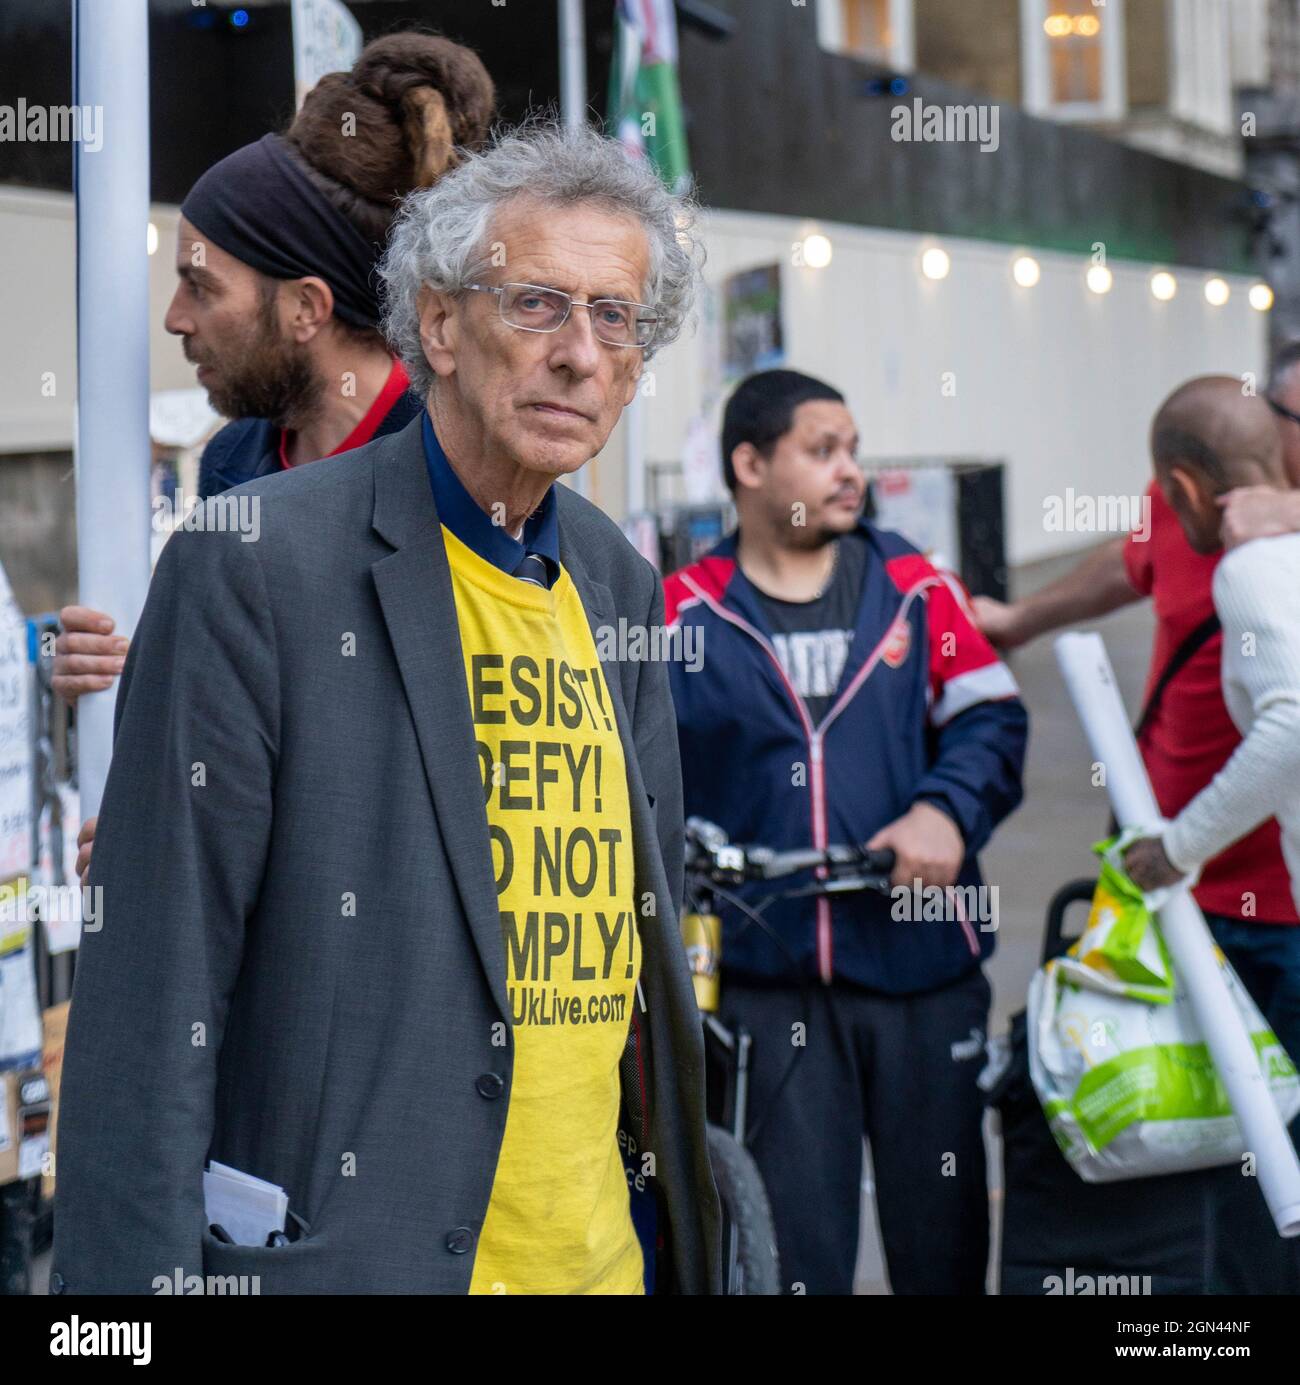 London, UK. 15th Sep, 2021. Piers Corbyn, the brother of former Labour Party leader, Jeremy Corbyn, attends an anti-vaccination, anti-lockdown protest outside Downing Street.Anti-vaccination and anti-lockdown protesters demonstrate outside Downing Street as the Prime Minister Boris Johnson carries out a reshuffle of his Cabinet. (Photo by Jason Brown/SOPA Images/Sipa USA) Credit: Sipa USA/Alamy Live News Stock Photo